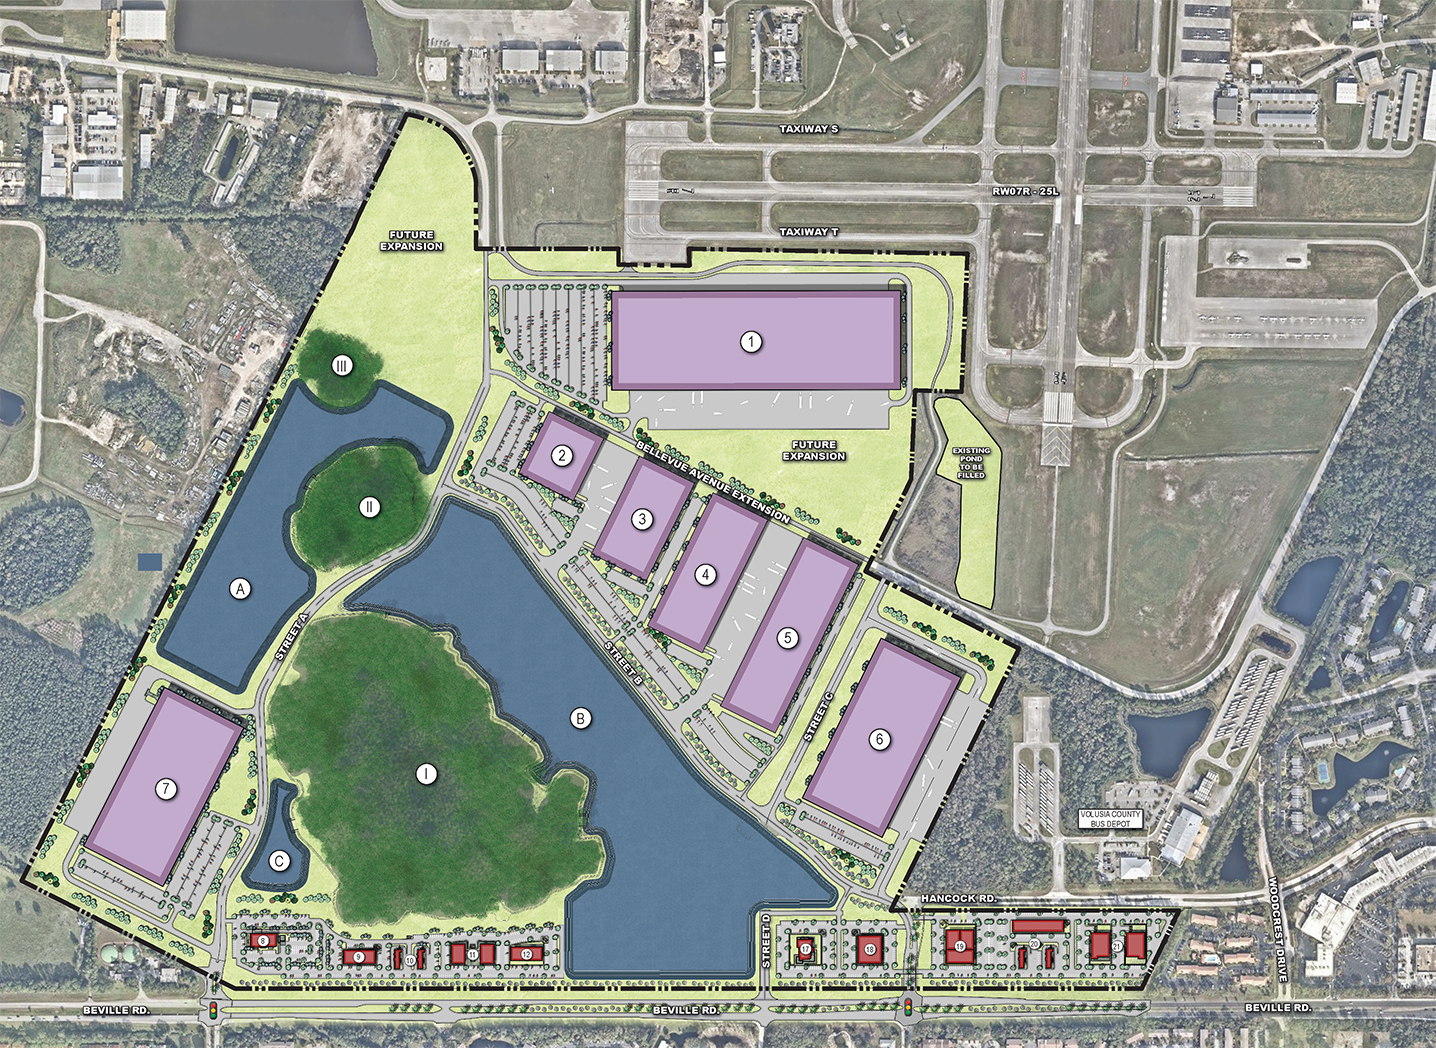 Conceptual of parcel 62 showing location near runway with 6 buildings